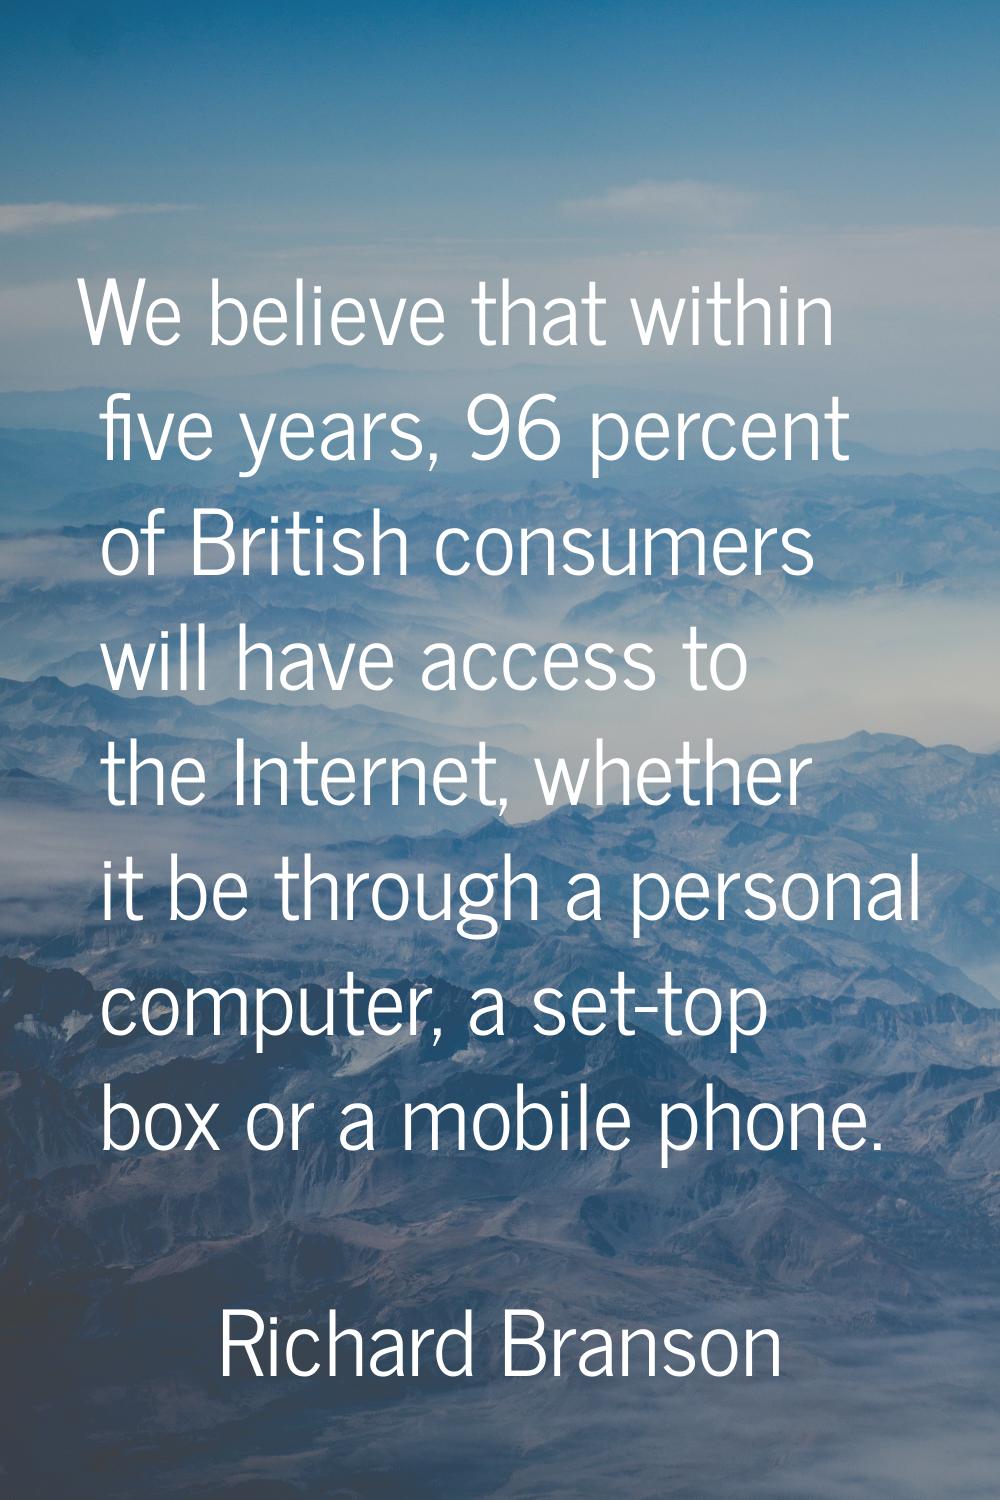 We believe that within five years, 96 percent of British consumers will have access to the Internet